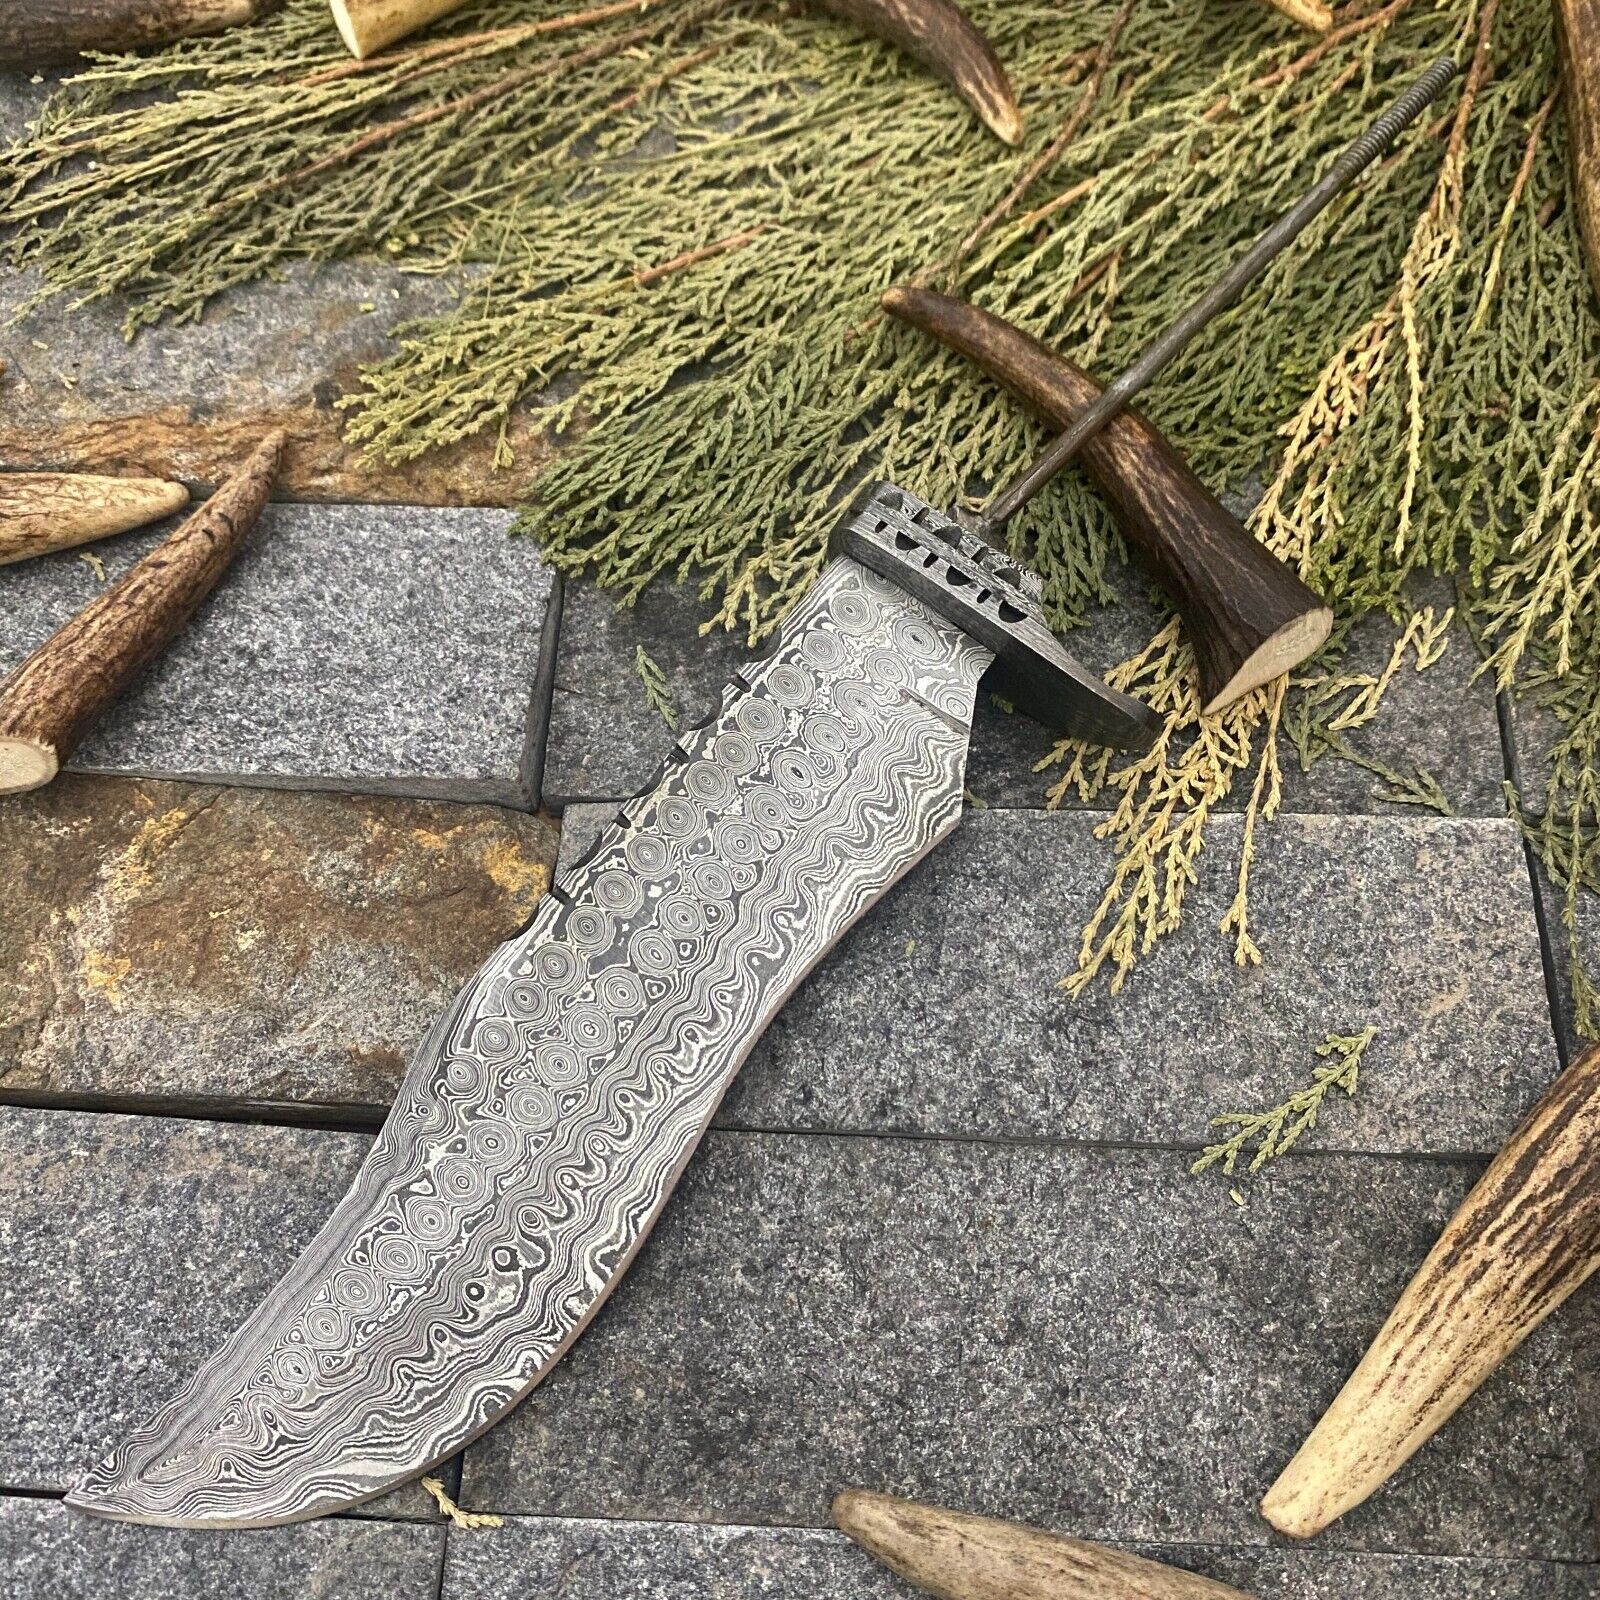 SHARD™ CUSTOM HAND FORGED Damascus Steel Hunting Bowie Blank Blade Knife Making